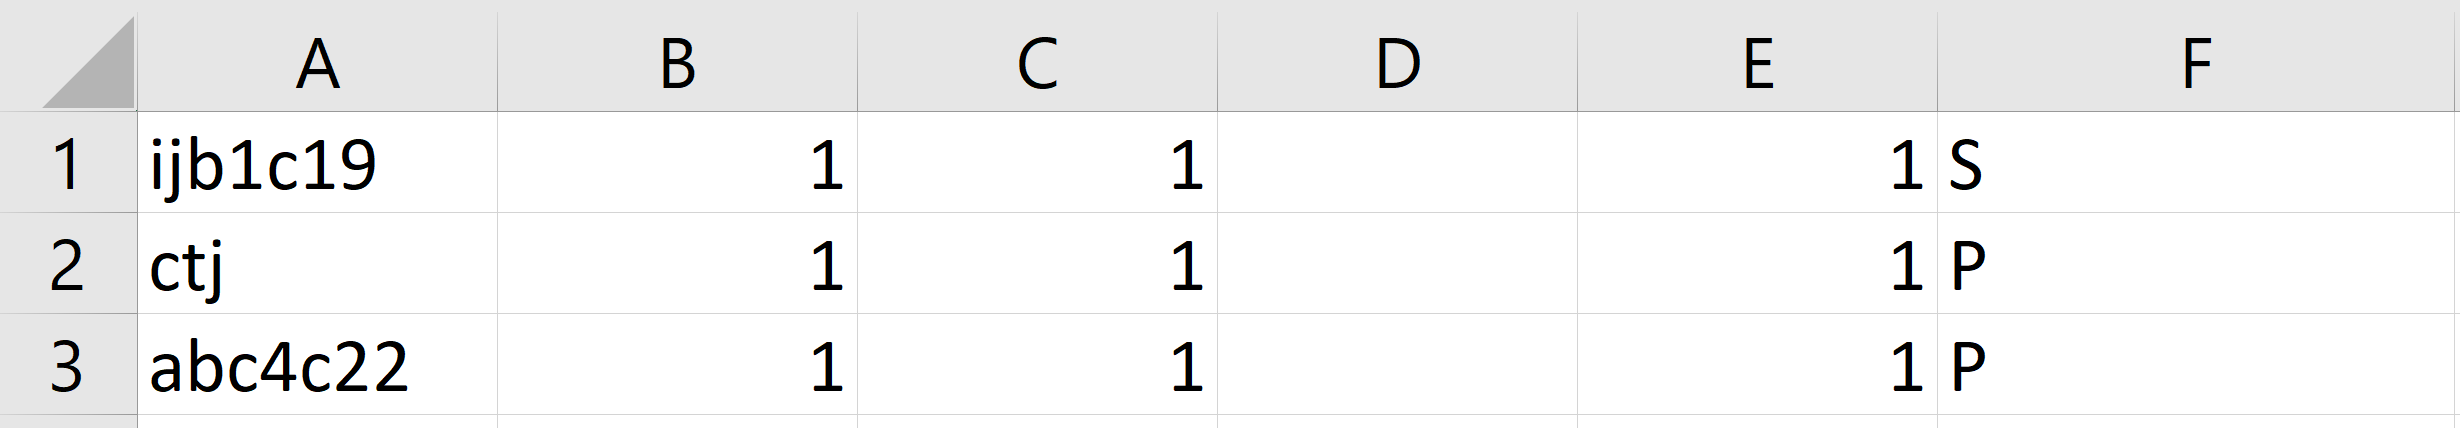 Spreadsheet layout columns A to F